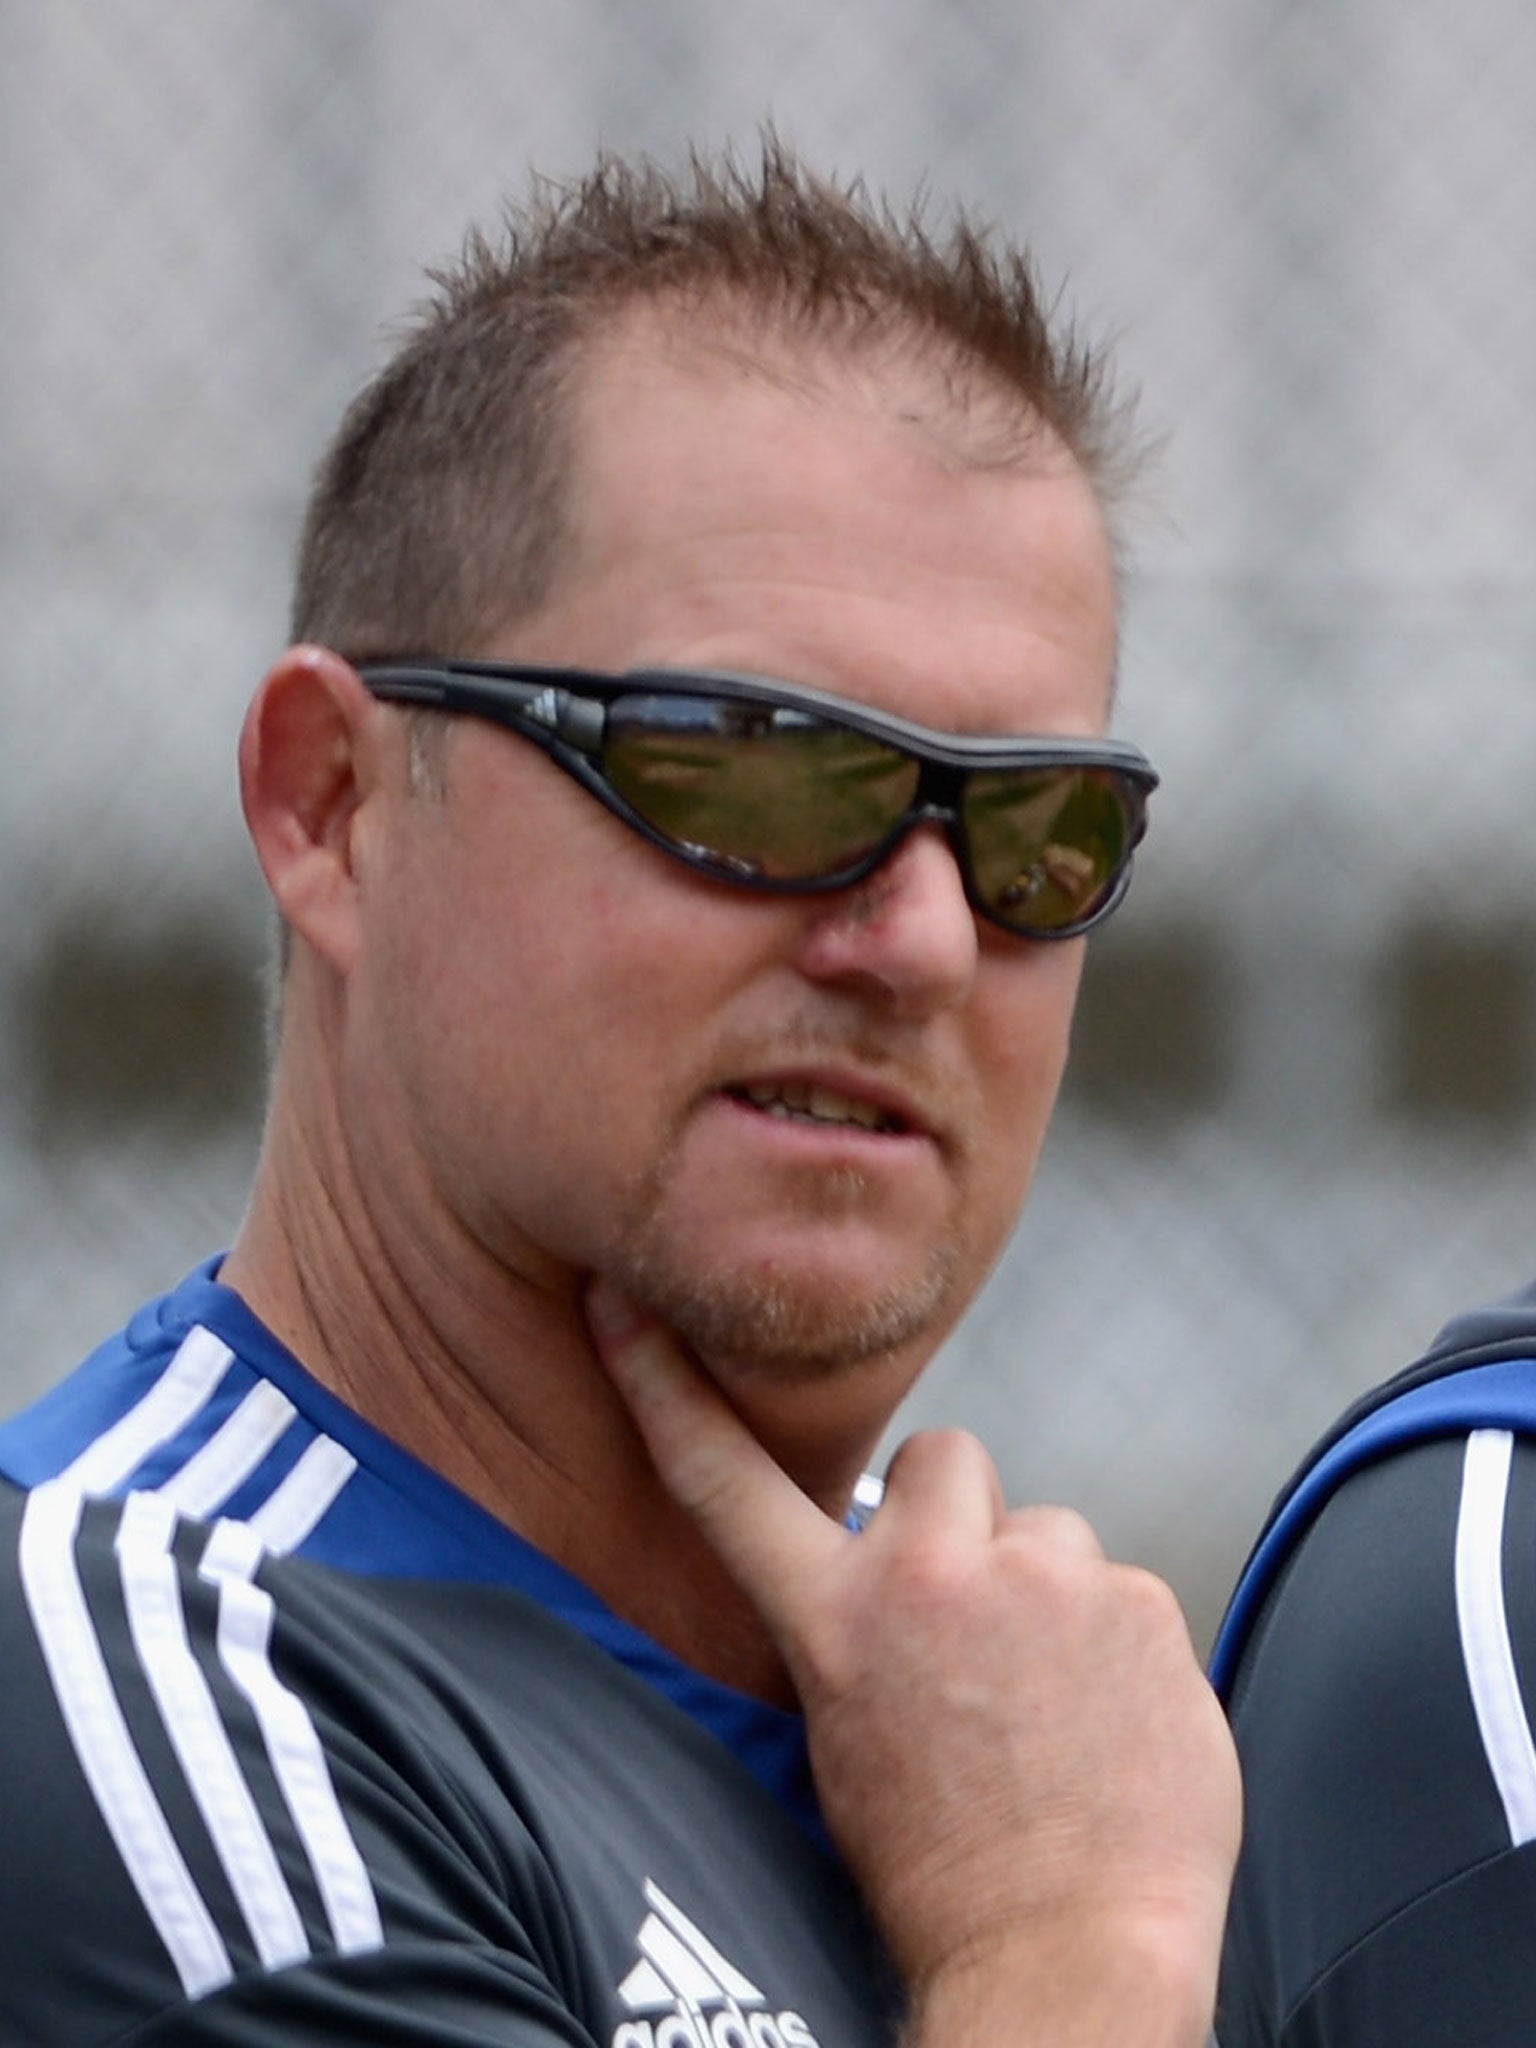 England’s bowling coach David Saker, believes squad competition is a sign of health